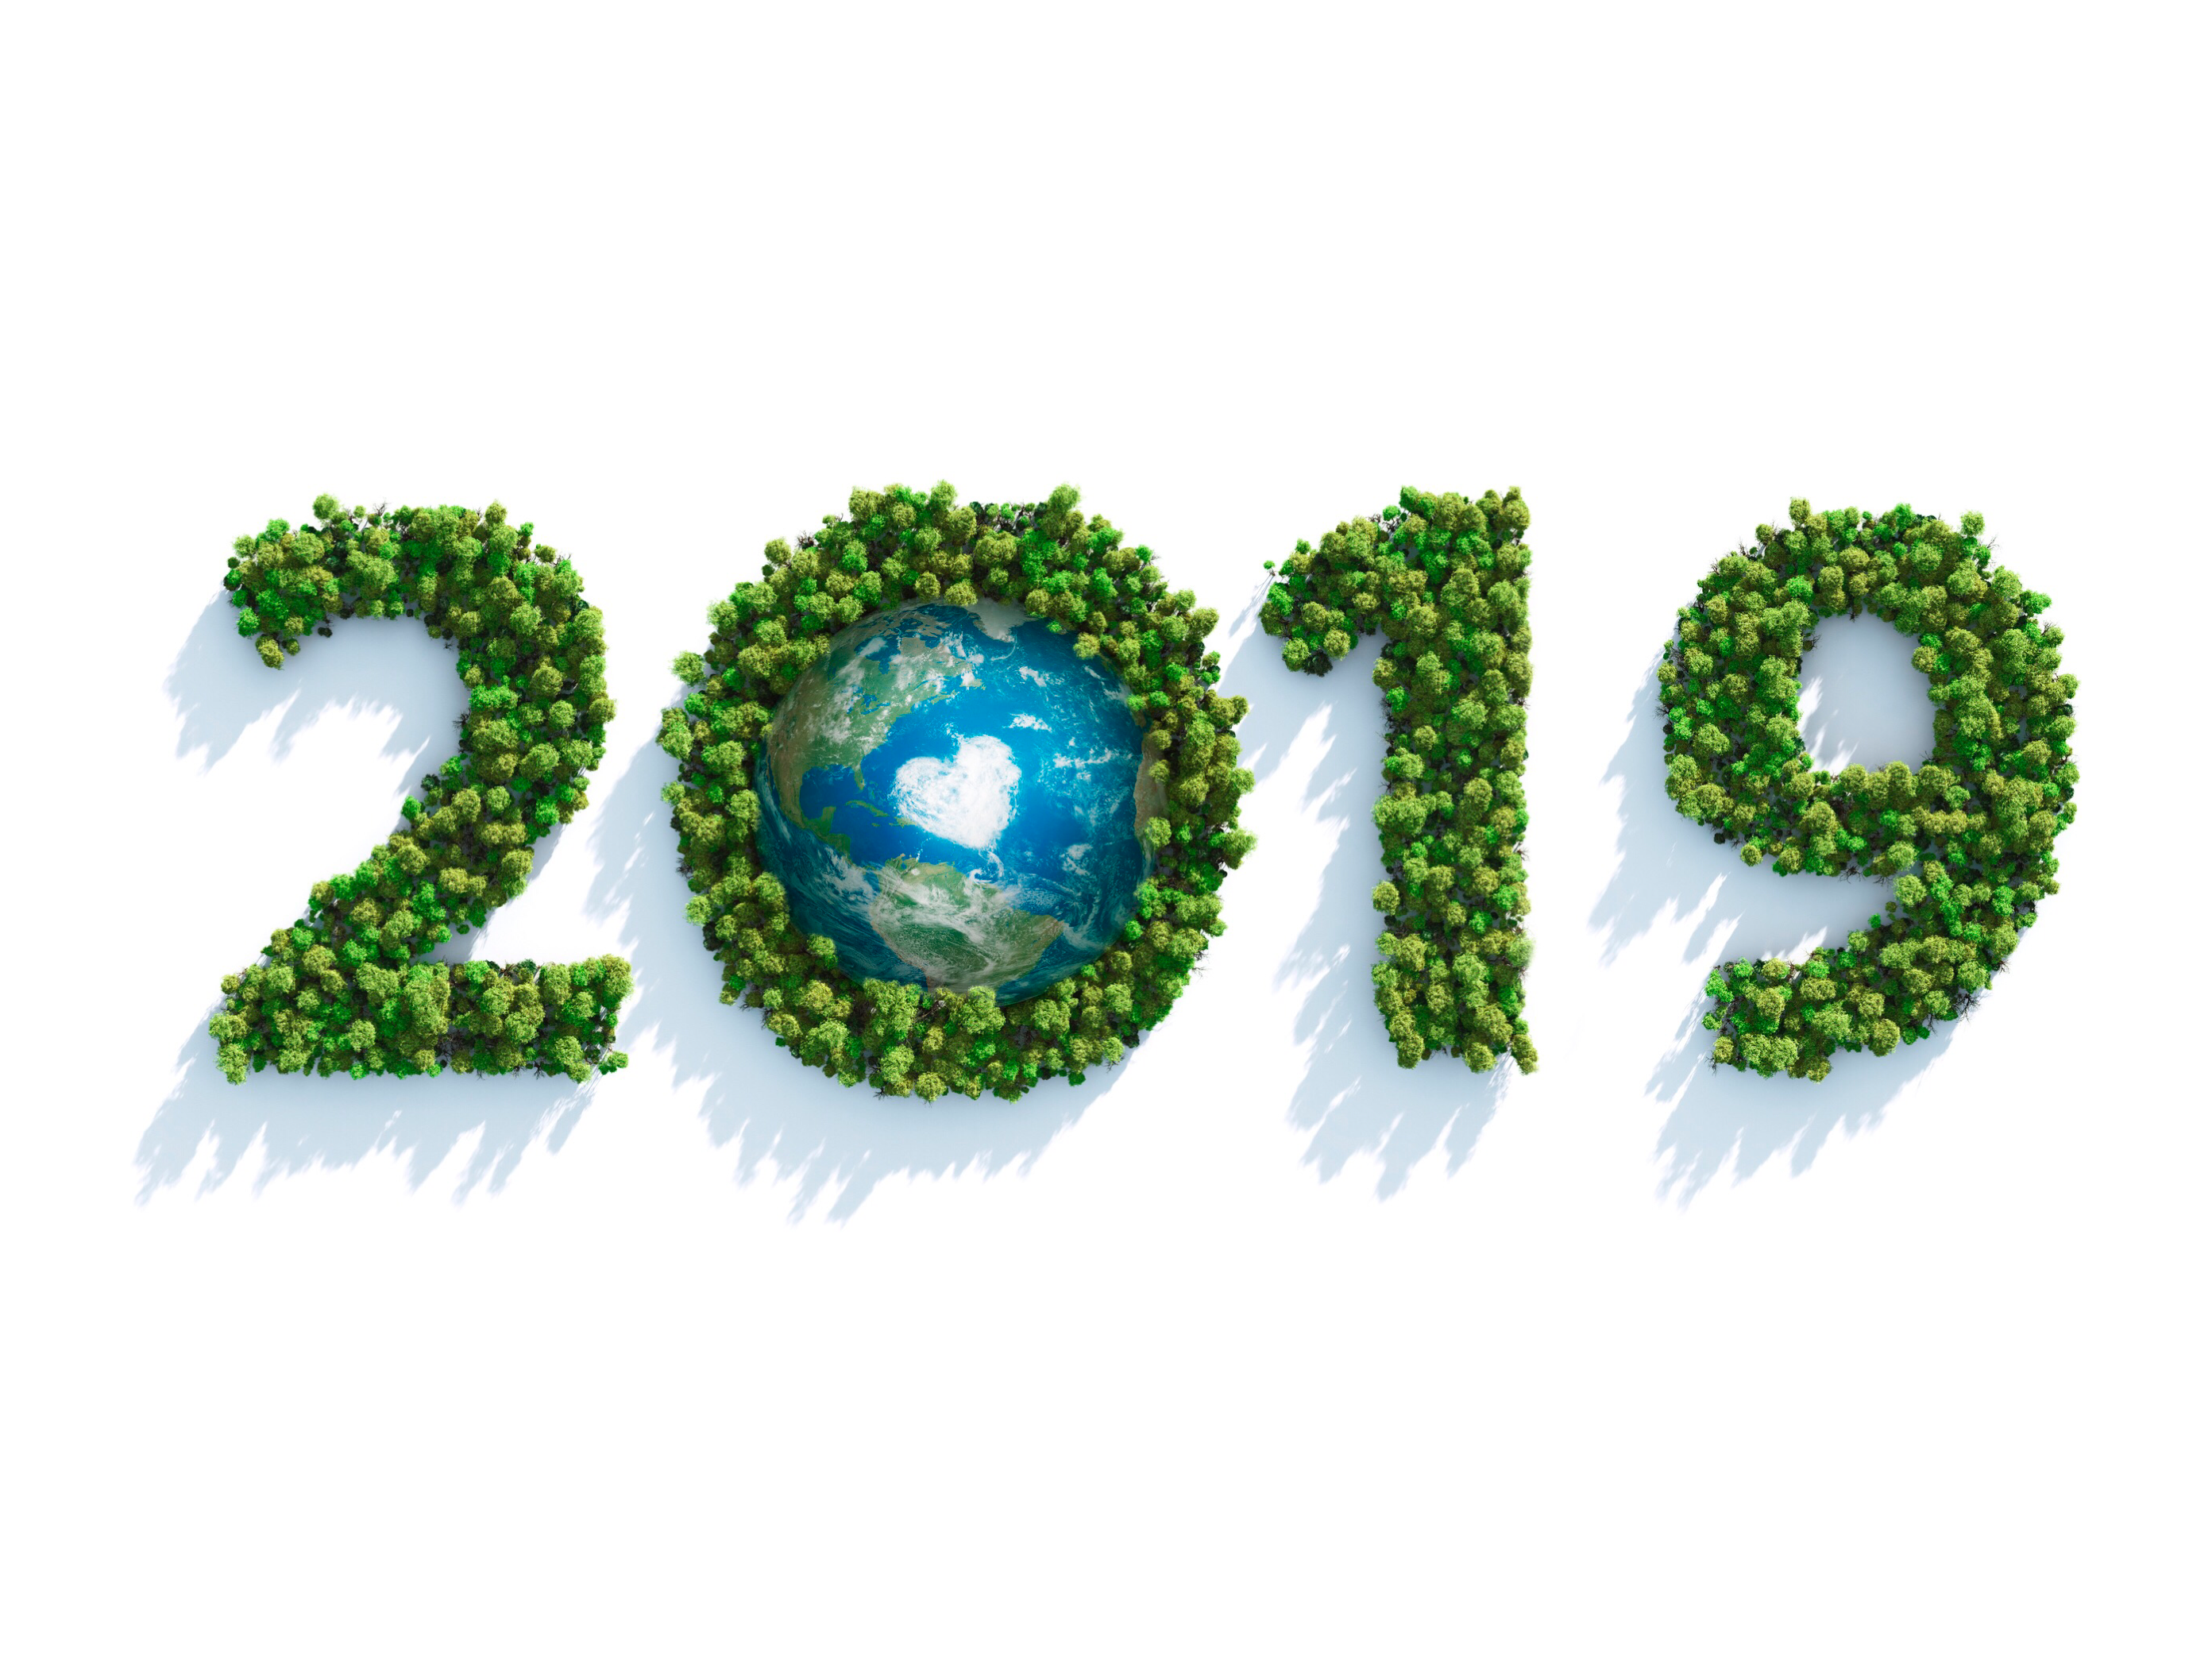 2019 spelled out with trees